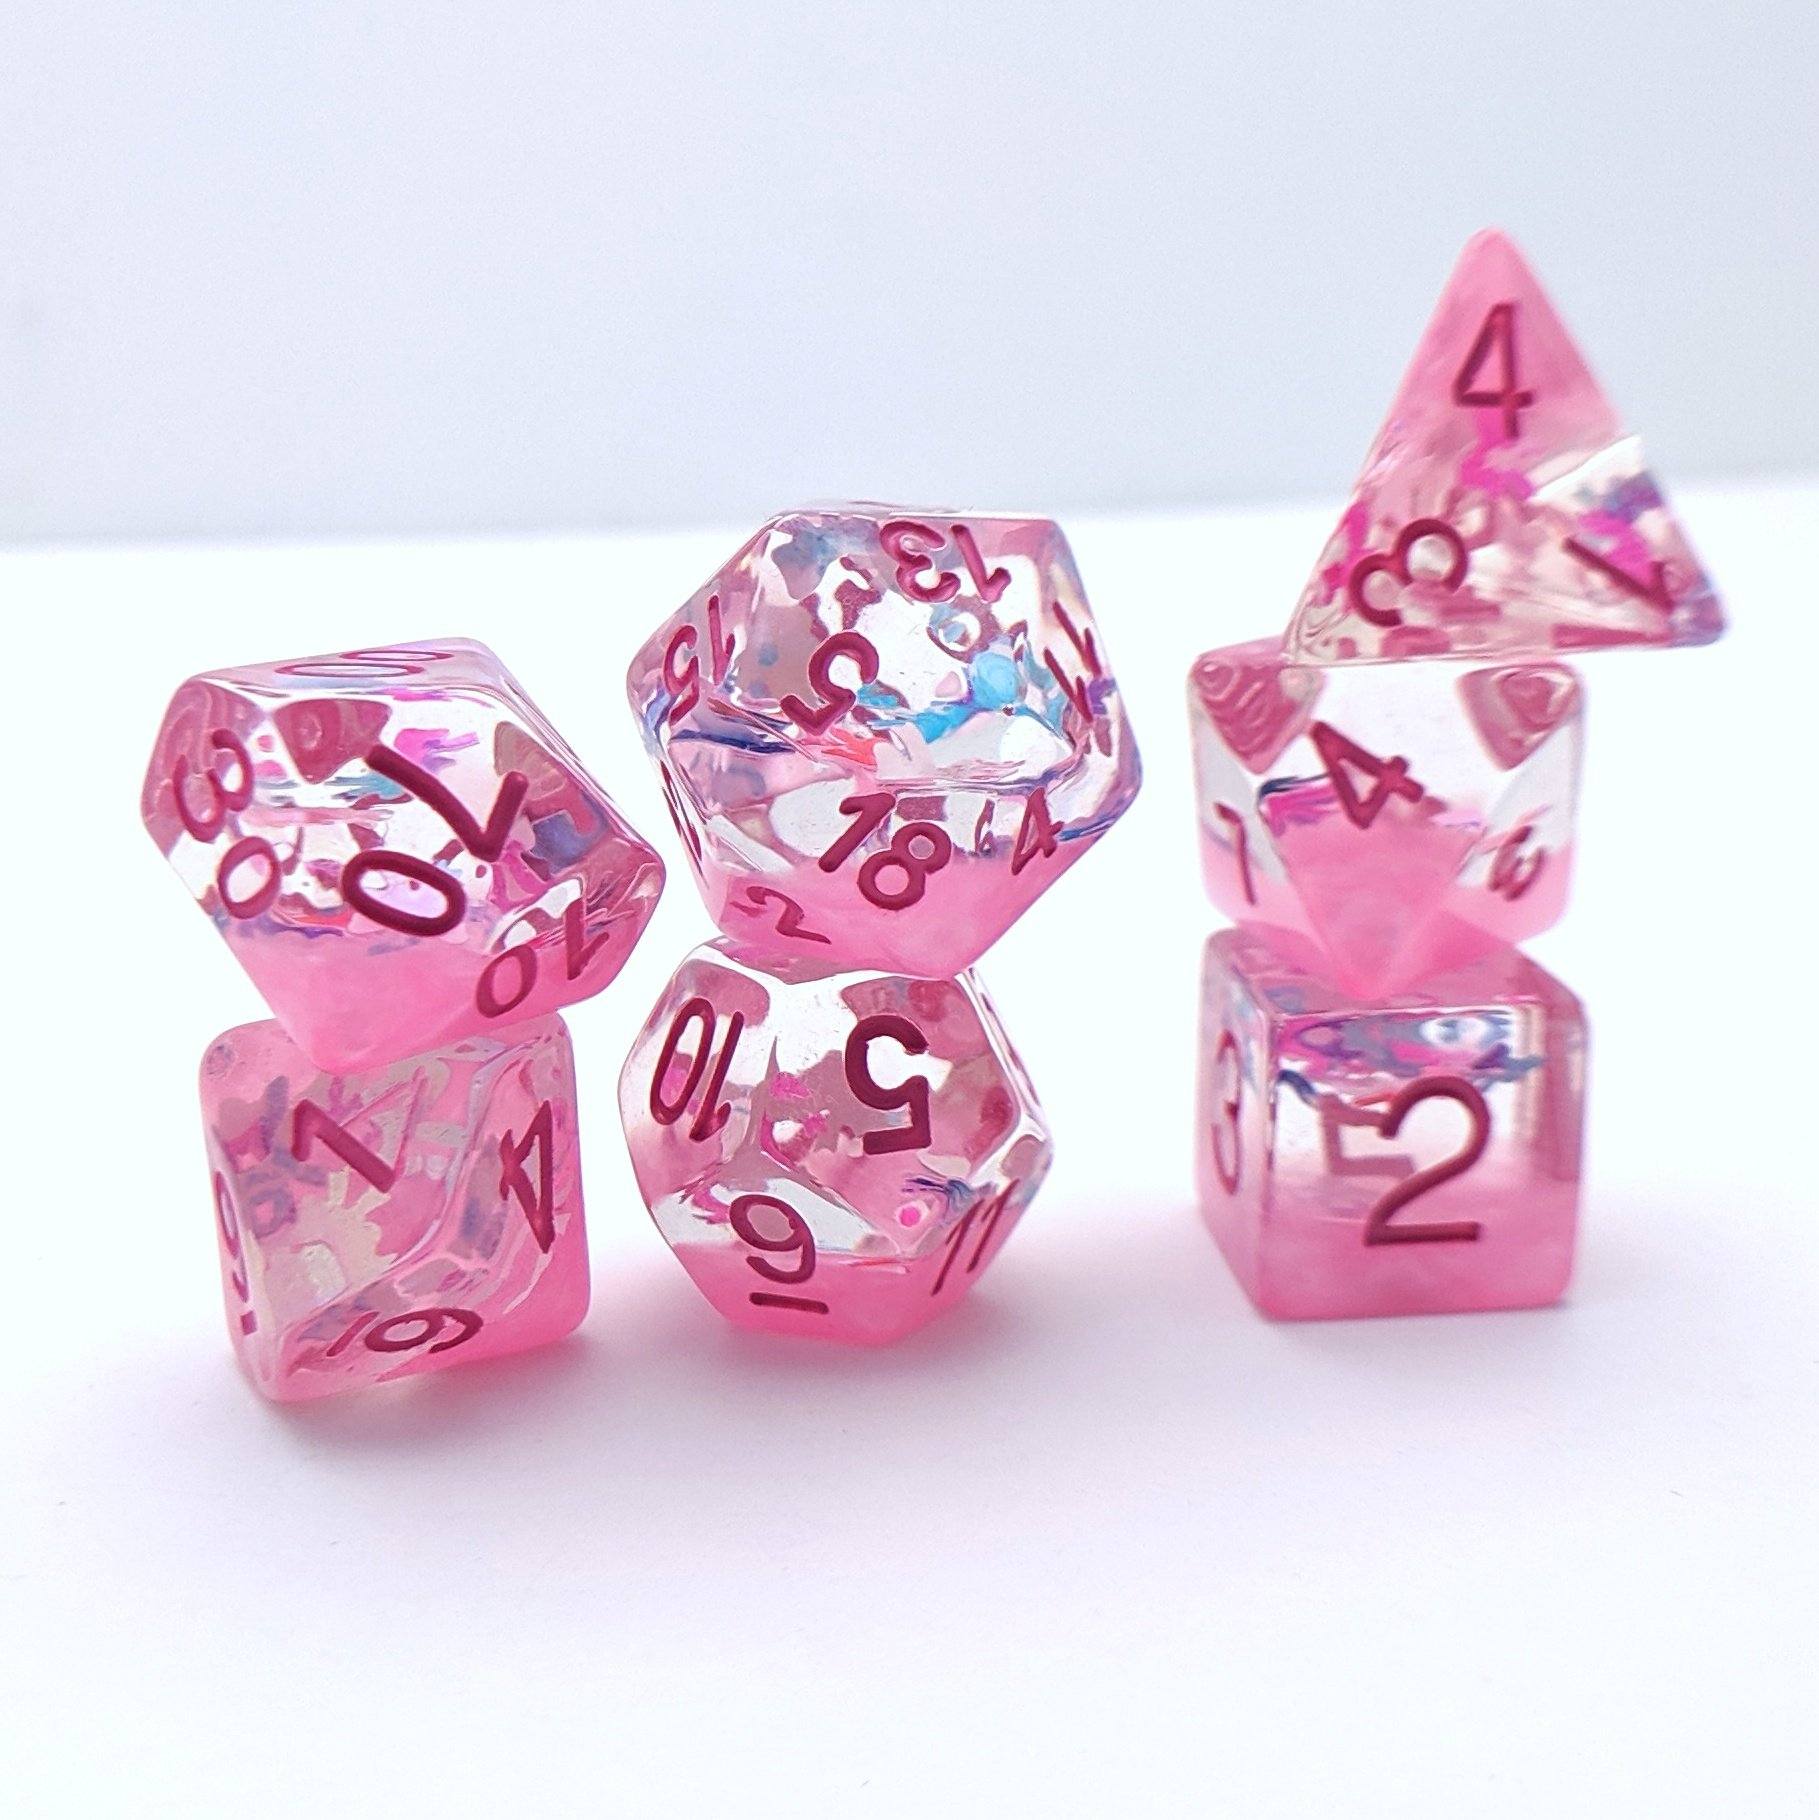 Ribbons and Bows DnD Dice Set, Pink Ribbon Translucent Glitter Dice - CozyGamer